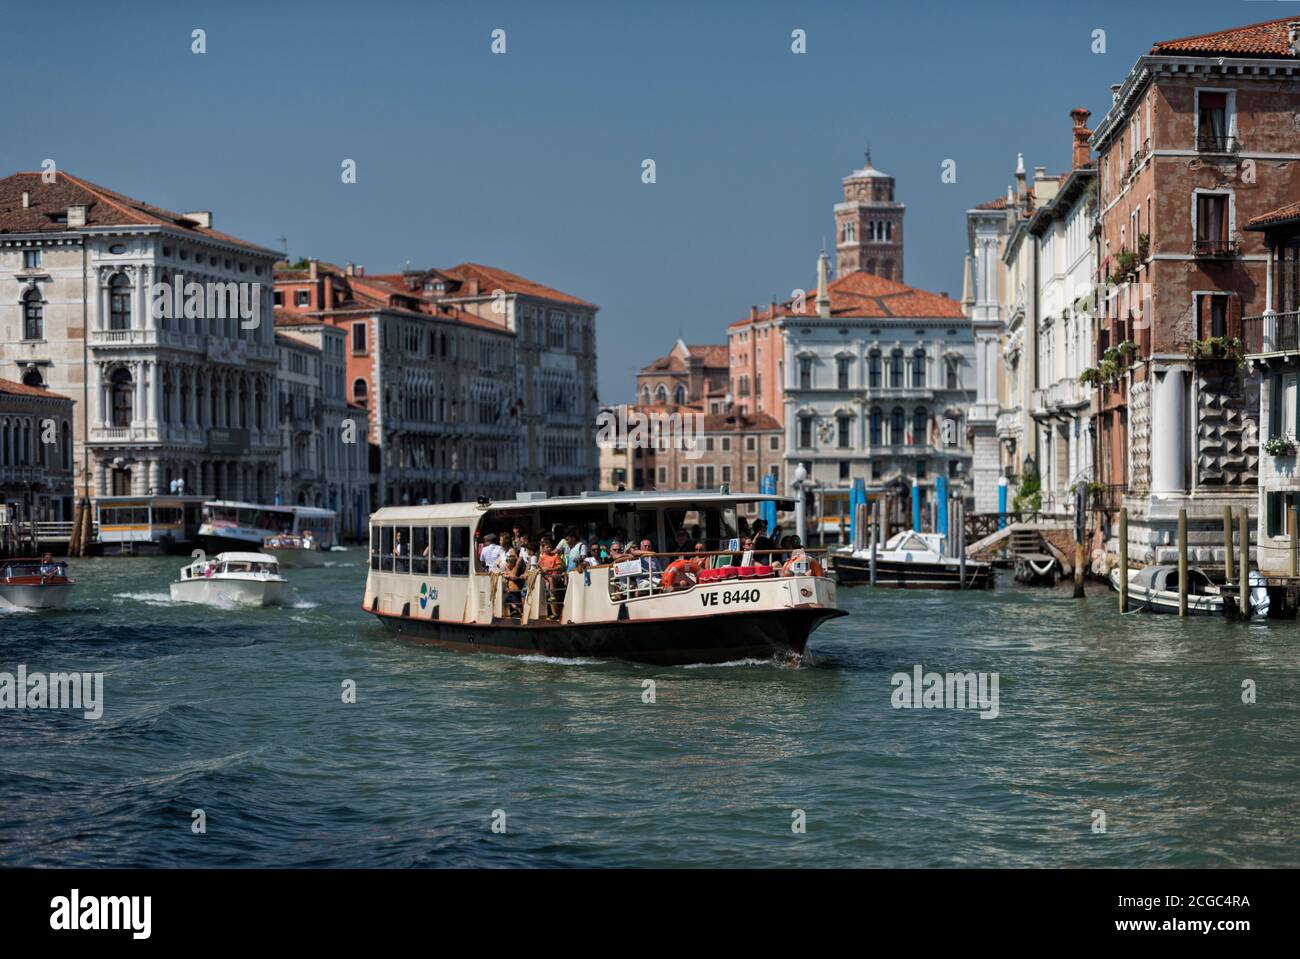 Venice's water way with local vernacular buildings peppering the water front. Shot taken from a boat, showing one of Venice's water buses and locals on their boats on the canal. Stock Photo